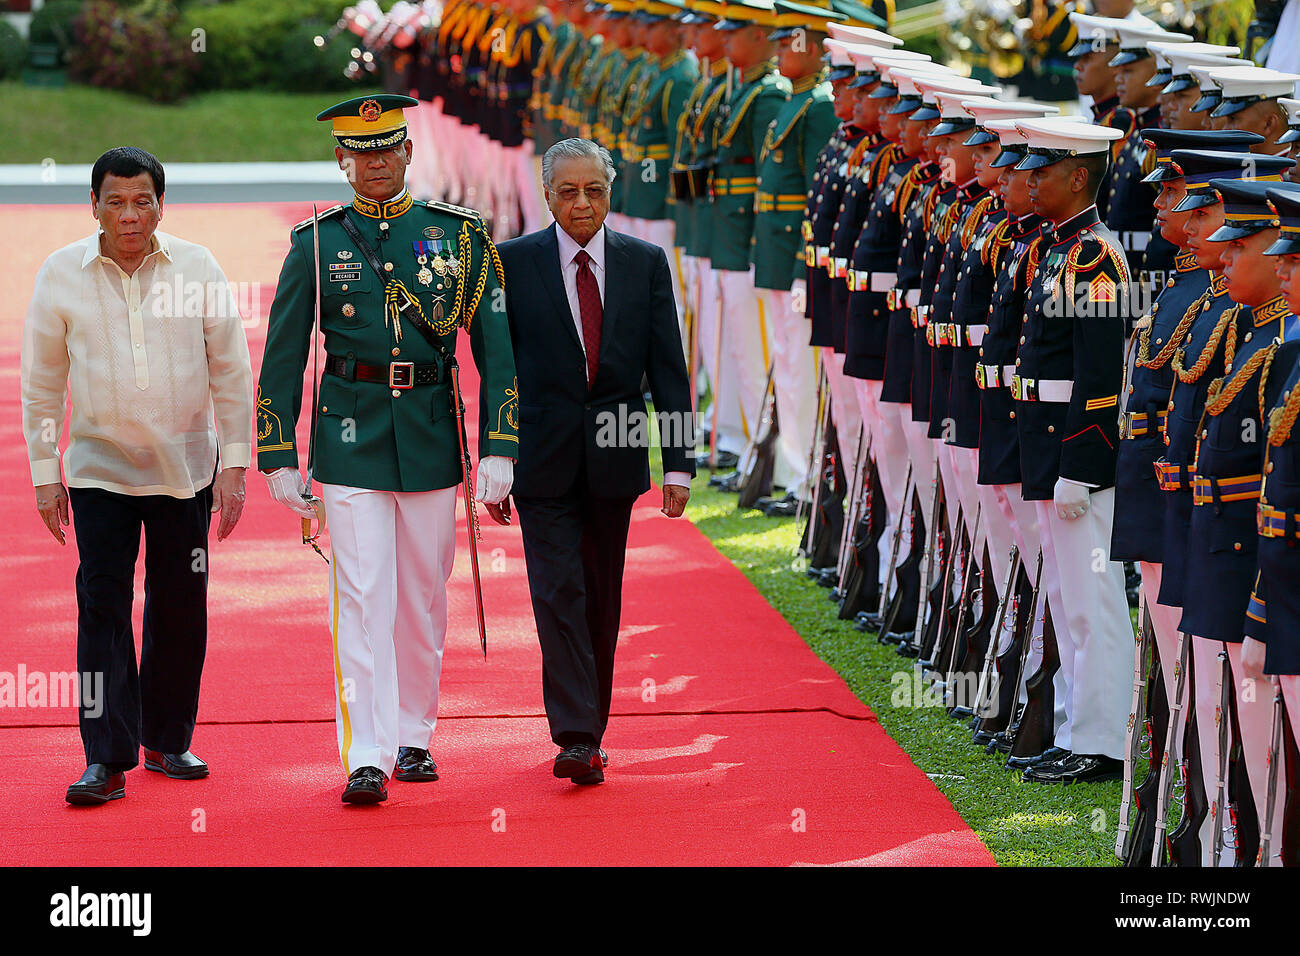 Manila, Philippines. 7th Mar, 2019. Visiting Malaysian Prime Minister Mahathir Mohamad (3rd L) and Philippine President Rodrigo Duterte (1st L) inspect honor guards during a welcoming ceremony at the Malacanang presidential palace in Manila, the Philippines, March 7, 2019. Credit: Rouelle Umali/Xinhua/Alamy Live News Stock Photo